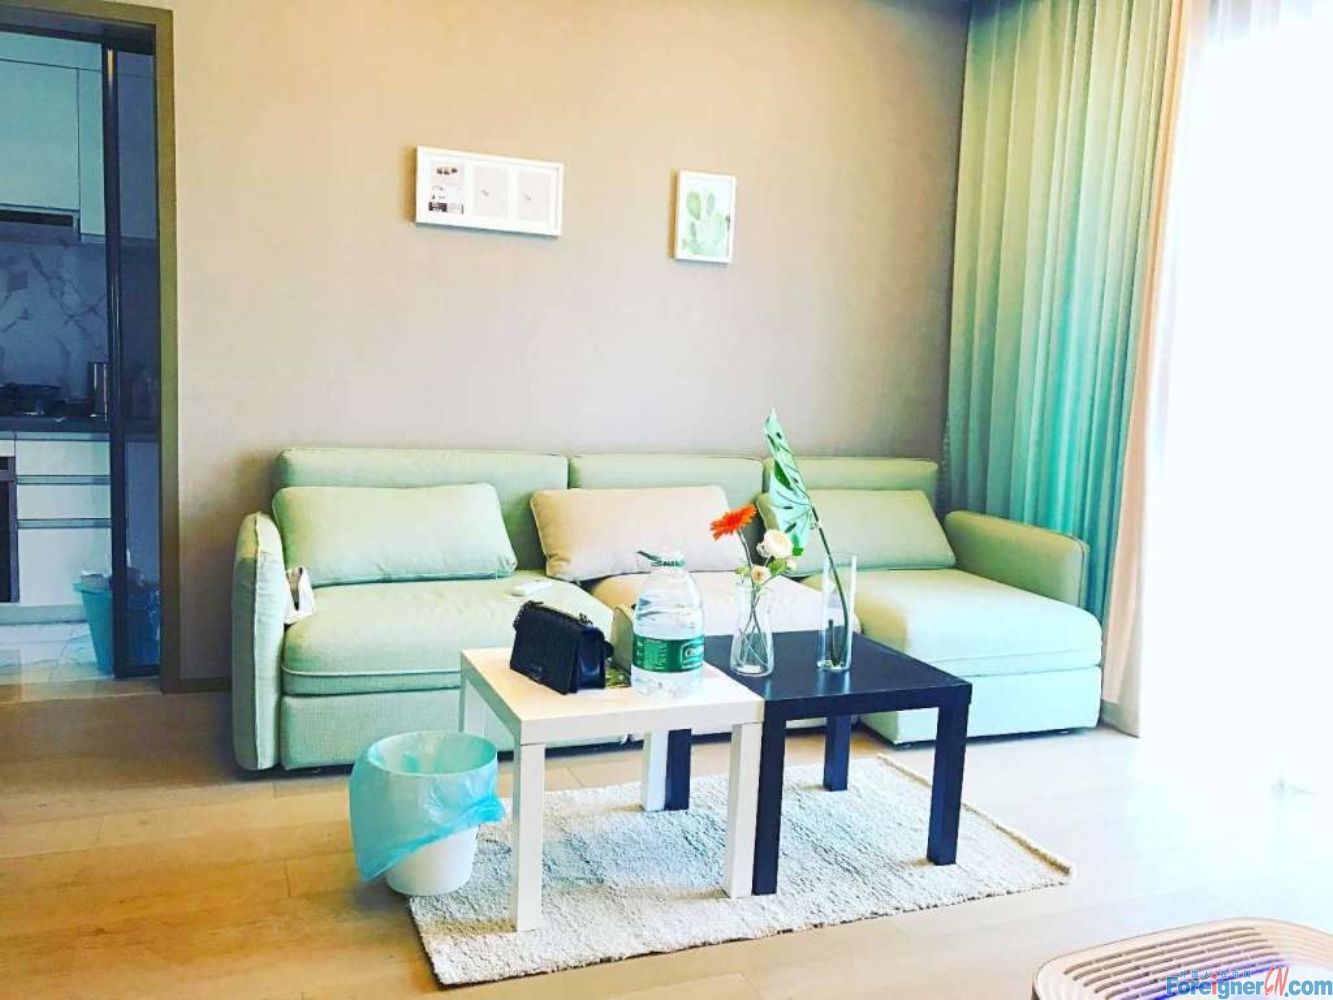 Fabulous! !! HLCC Apartment to rent in Suzhou /SIP / 2 bedrooms and 1 bathroom/Central AC and floor heating,with balcony /CBD of east Jinji lake /Times Square 